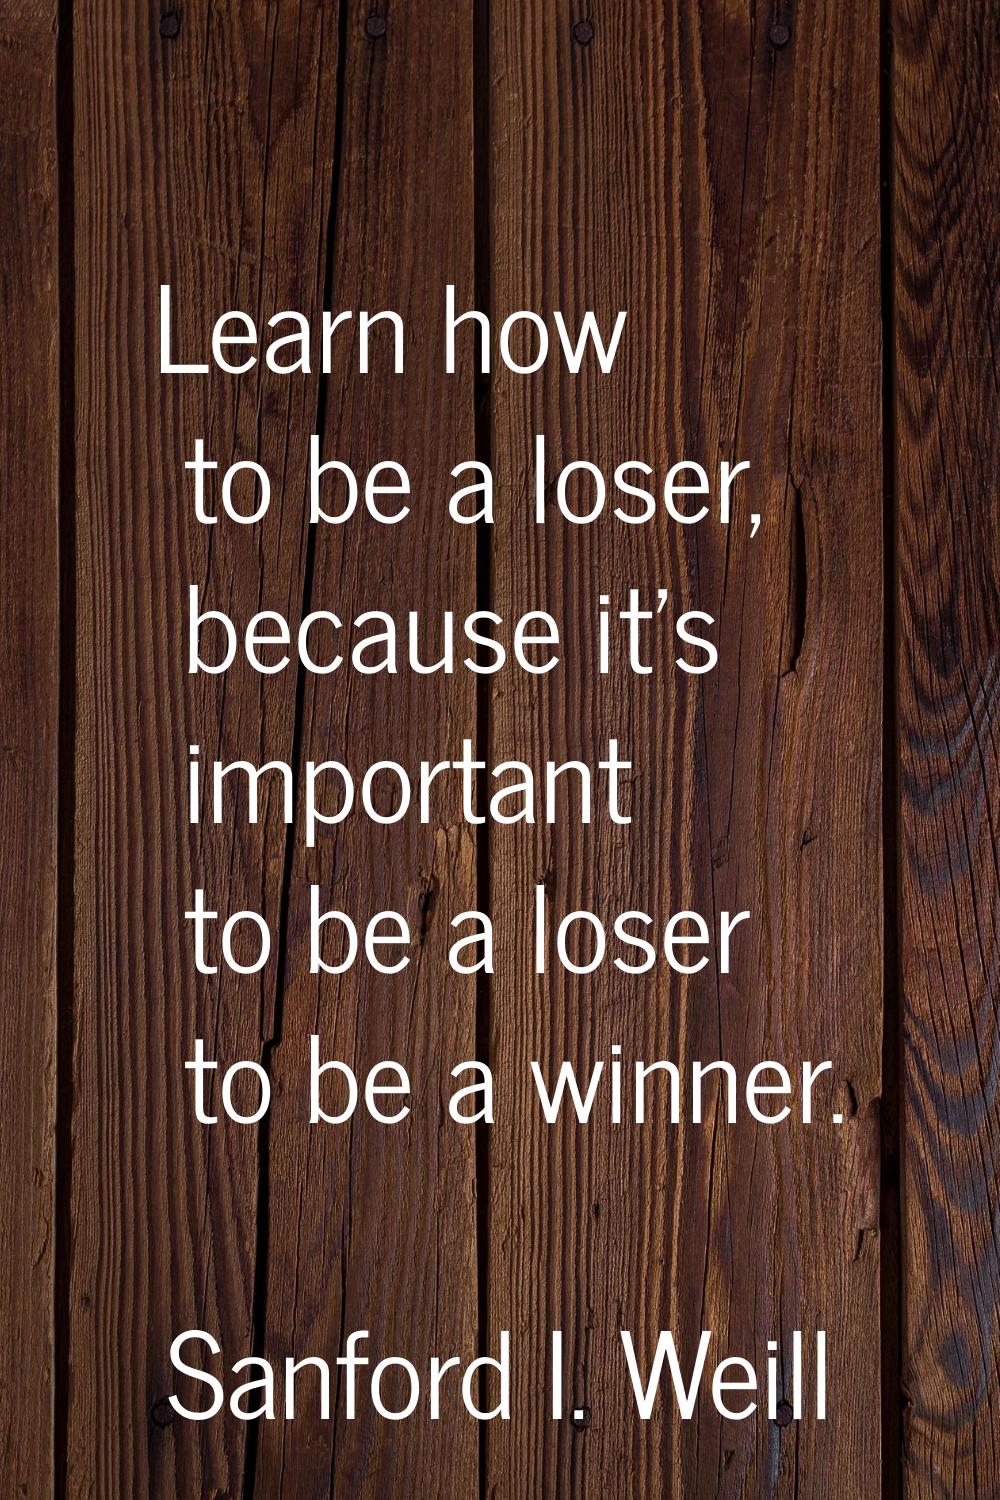 Learn how to be a loser, because it's important to be a loser to be a winner.